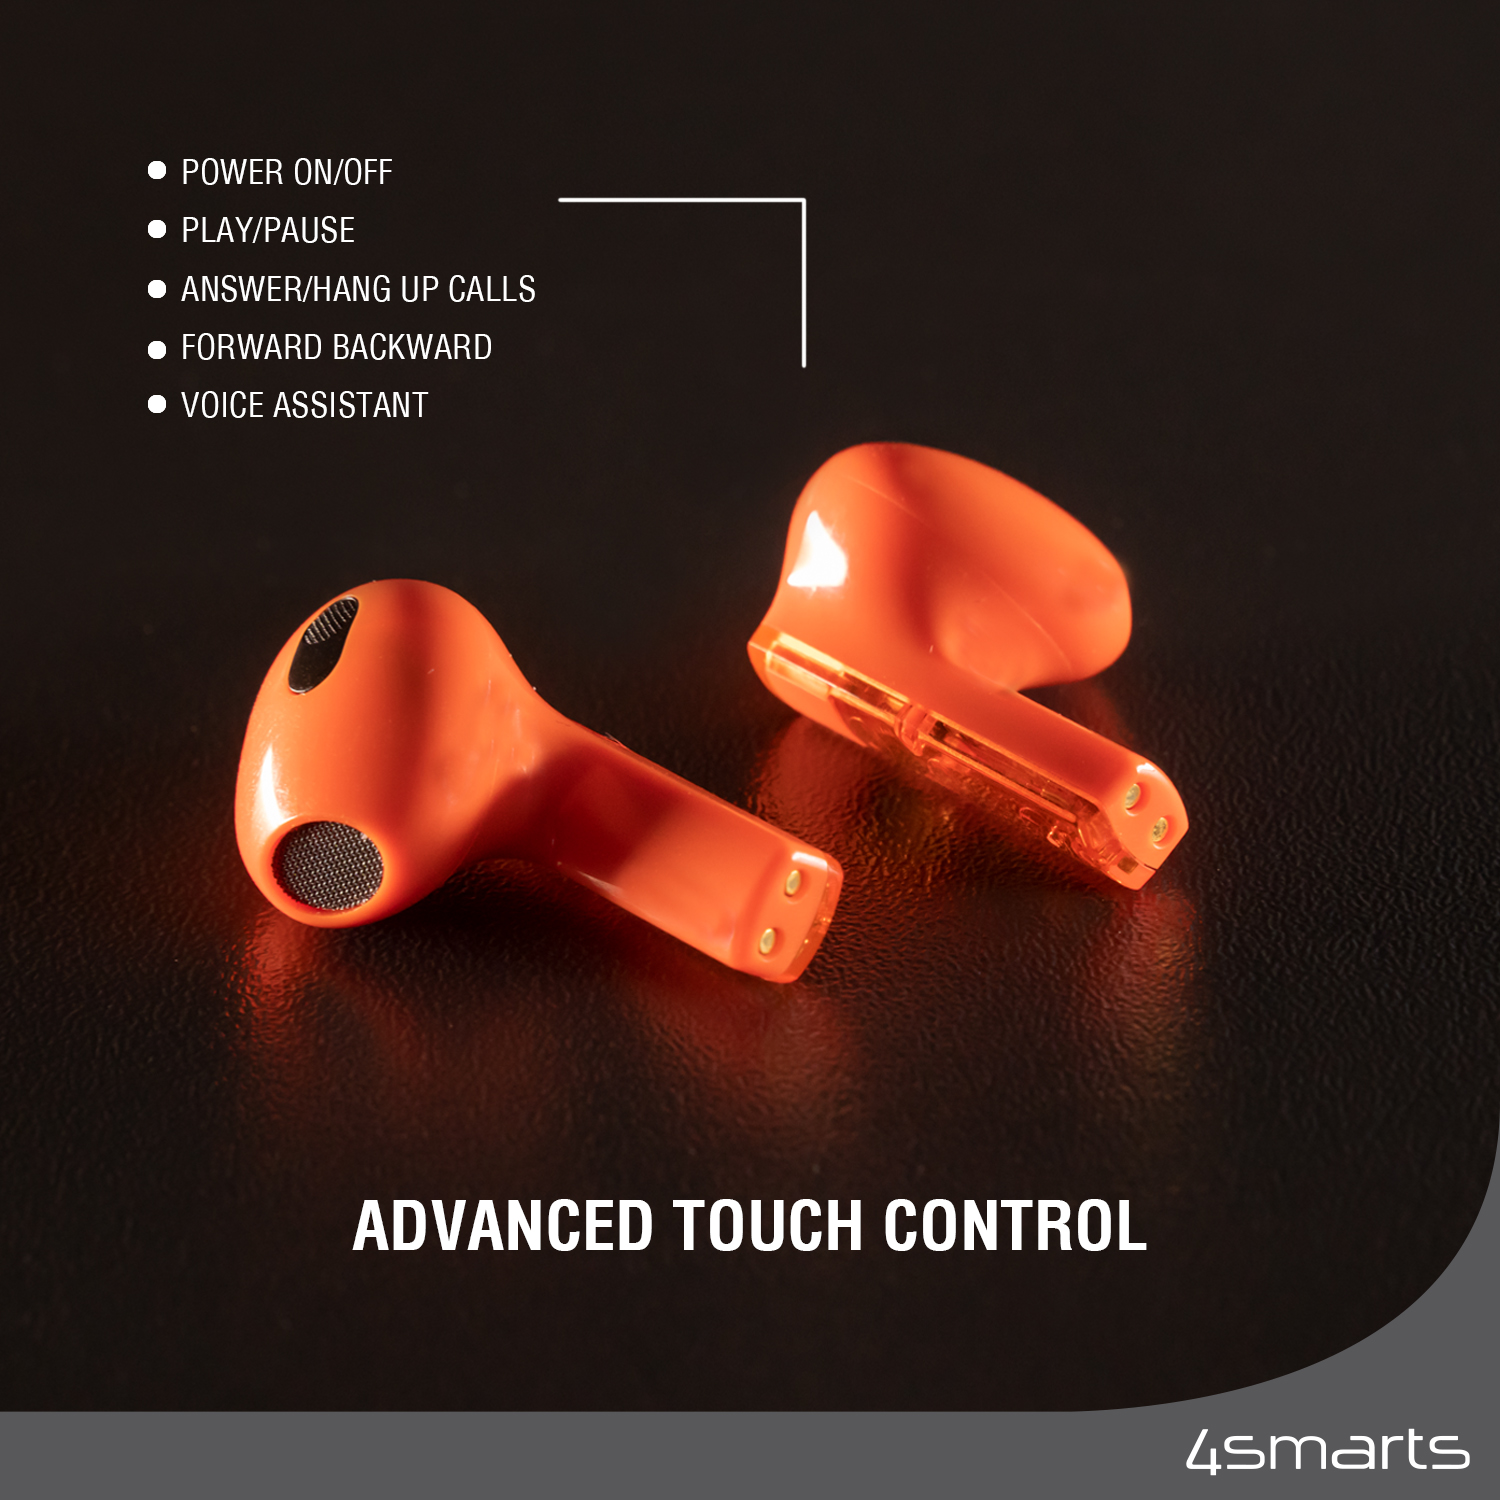 We designed these earphones including the intuitive touch and voice control.